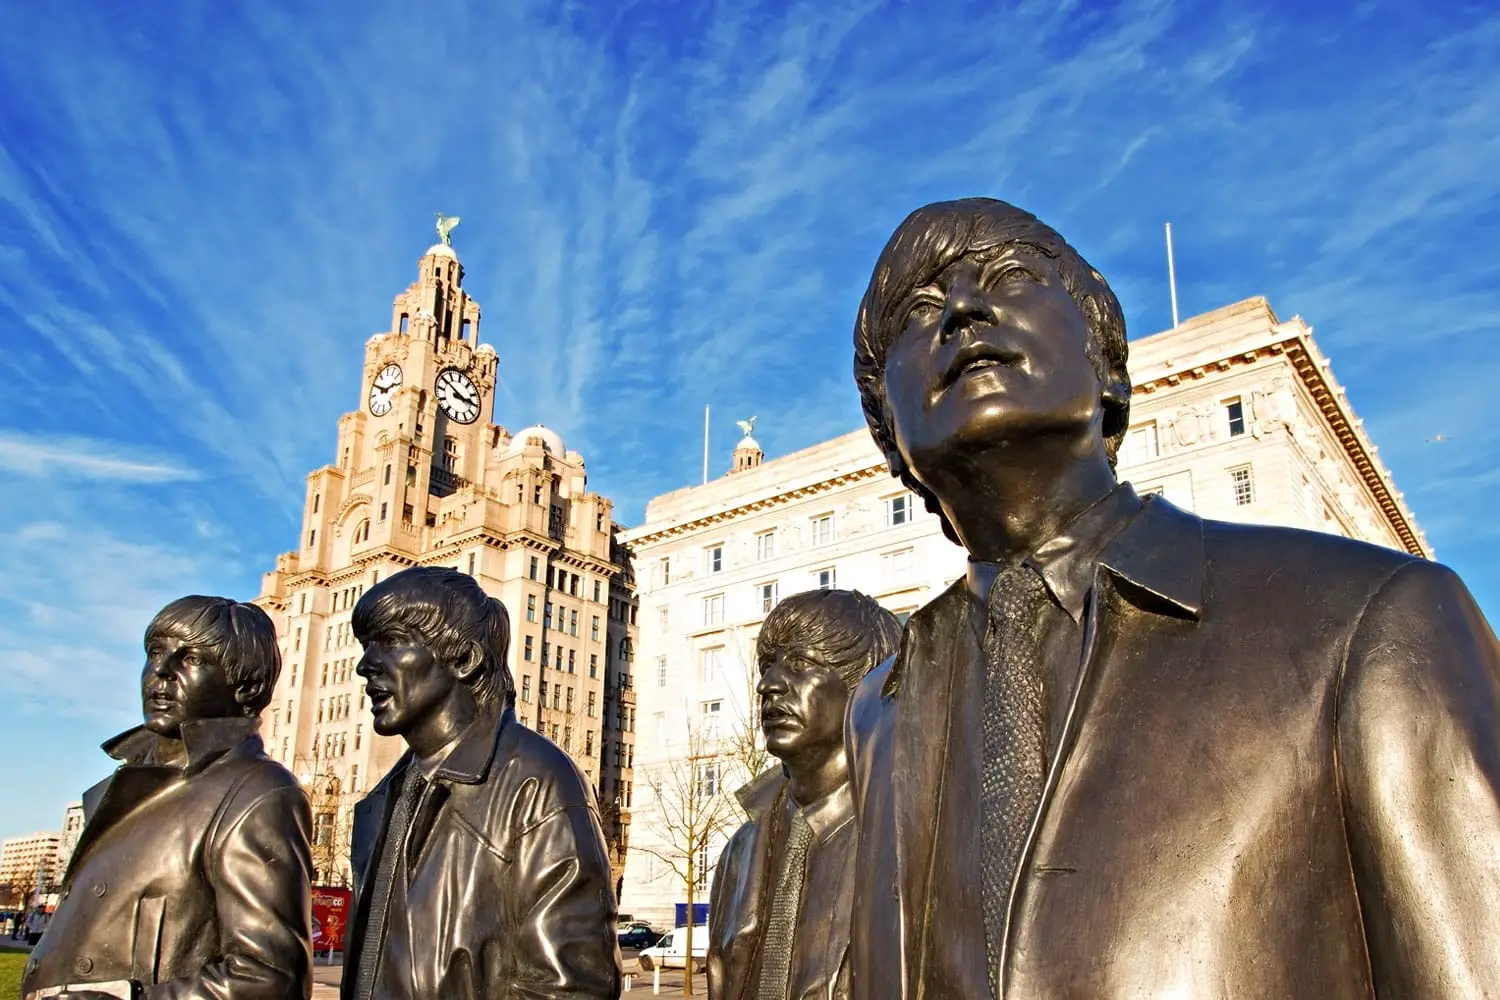 Bronze statue of The Beatles sculpted at the Pier Head in Liverpool